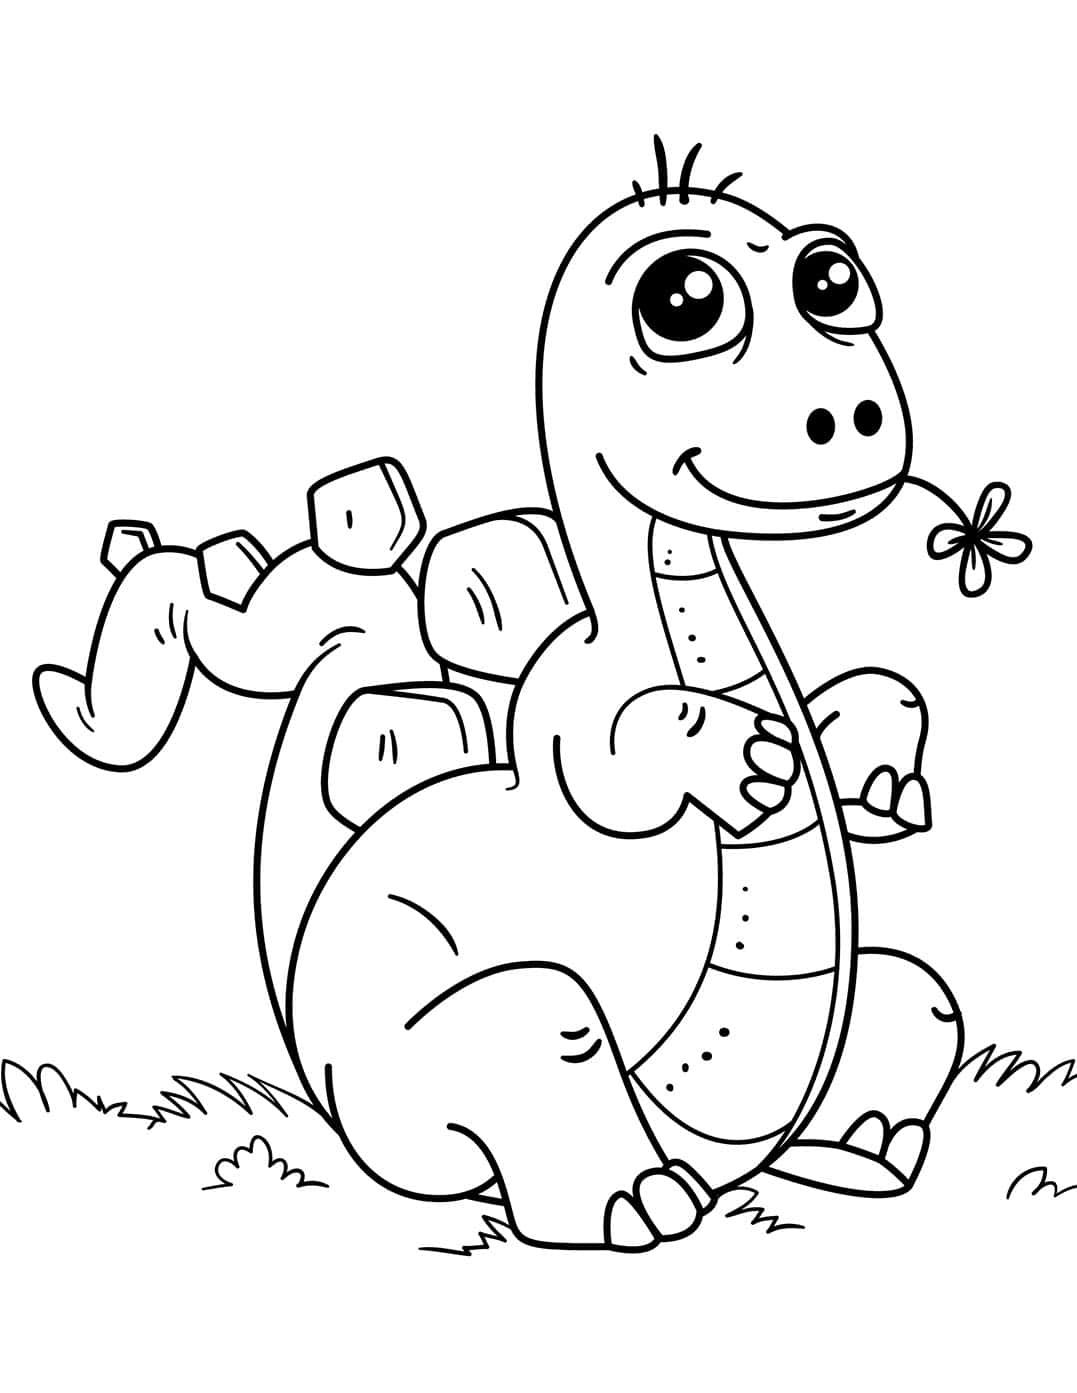 "Explore The Exciting World of Dinosaurs With Coloring!"